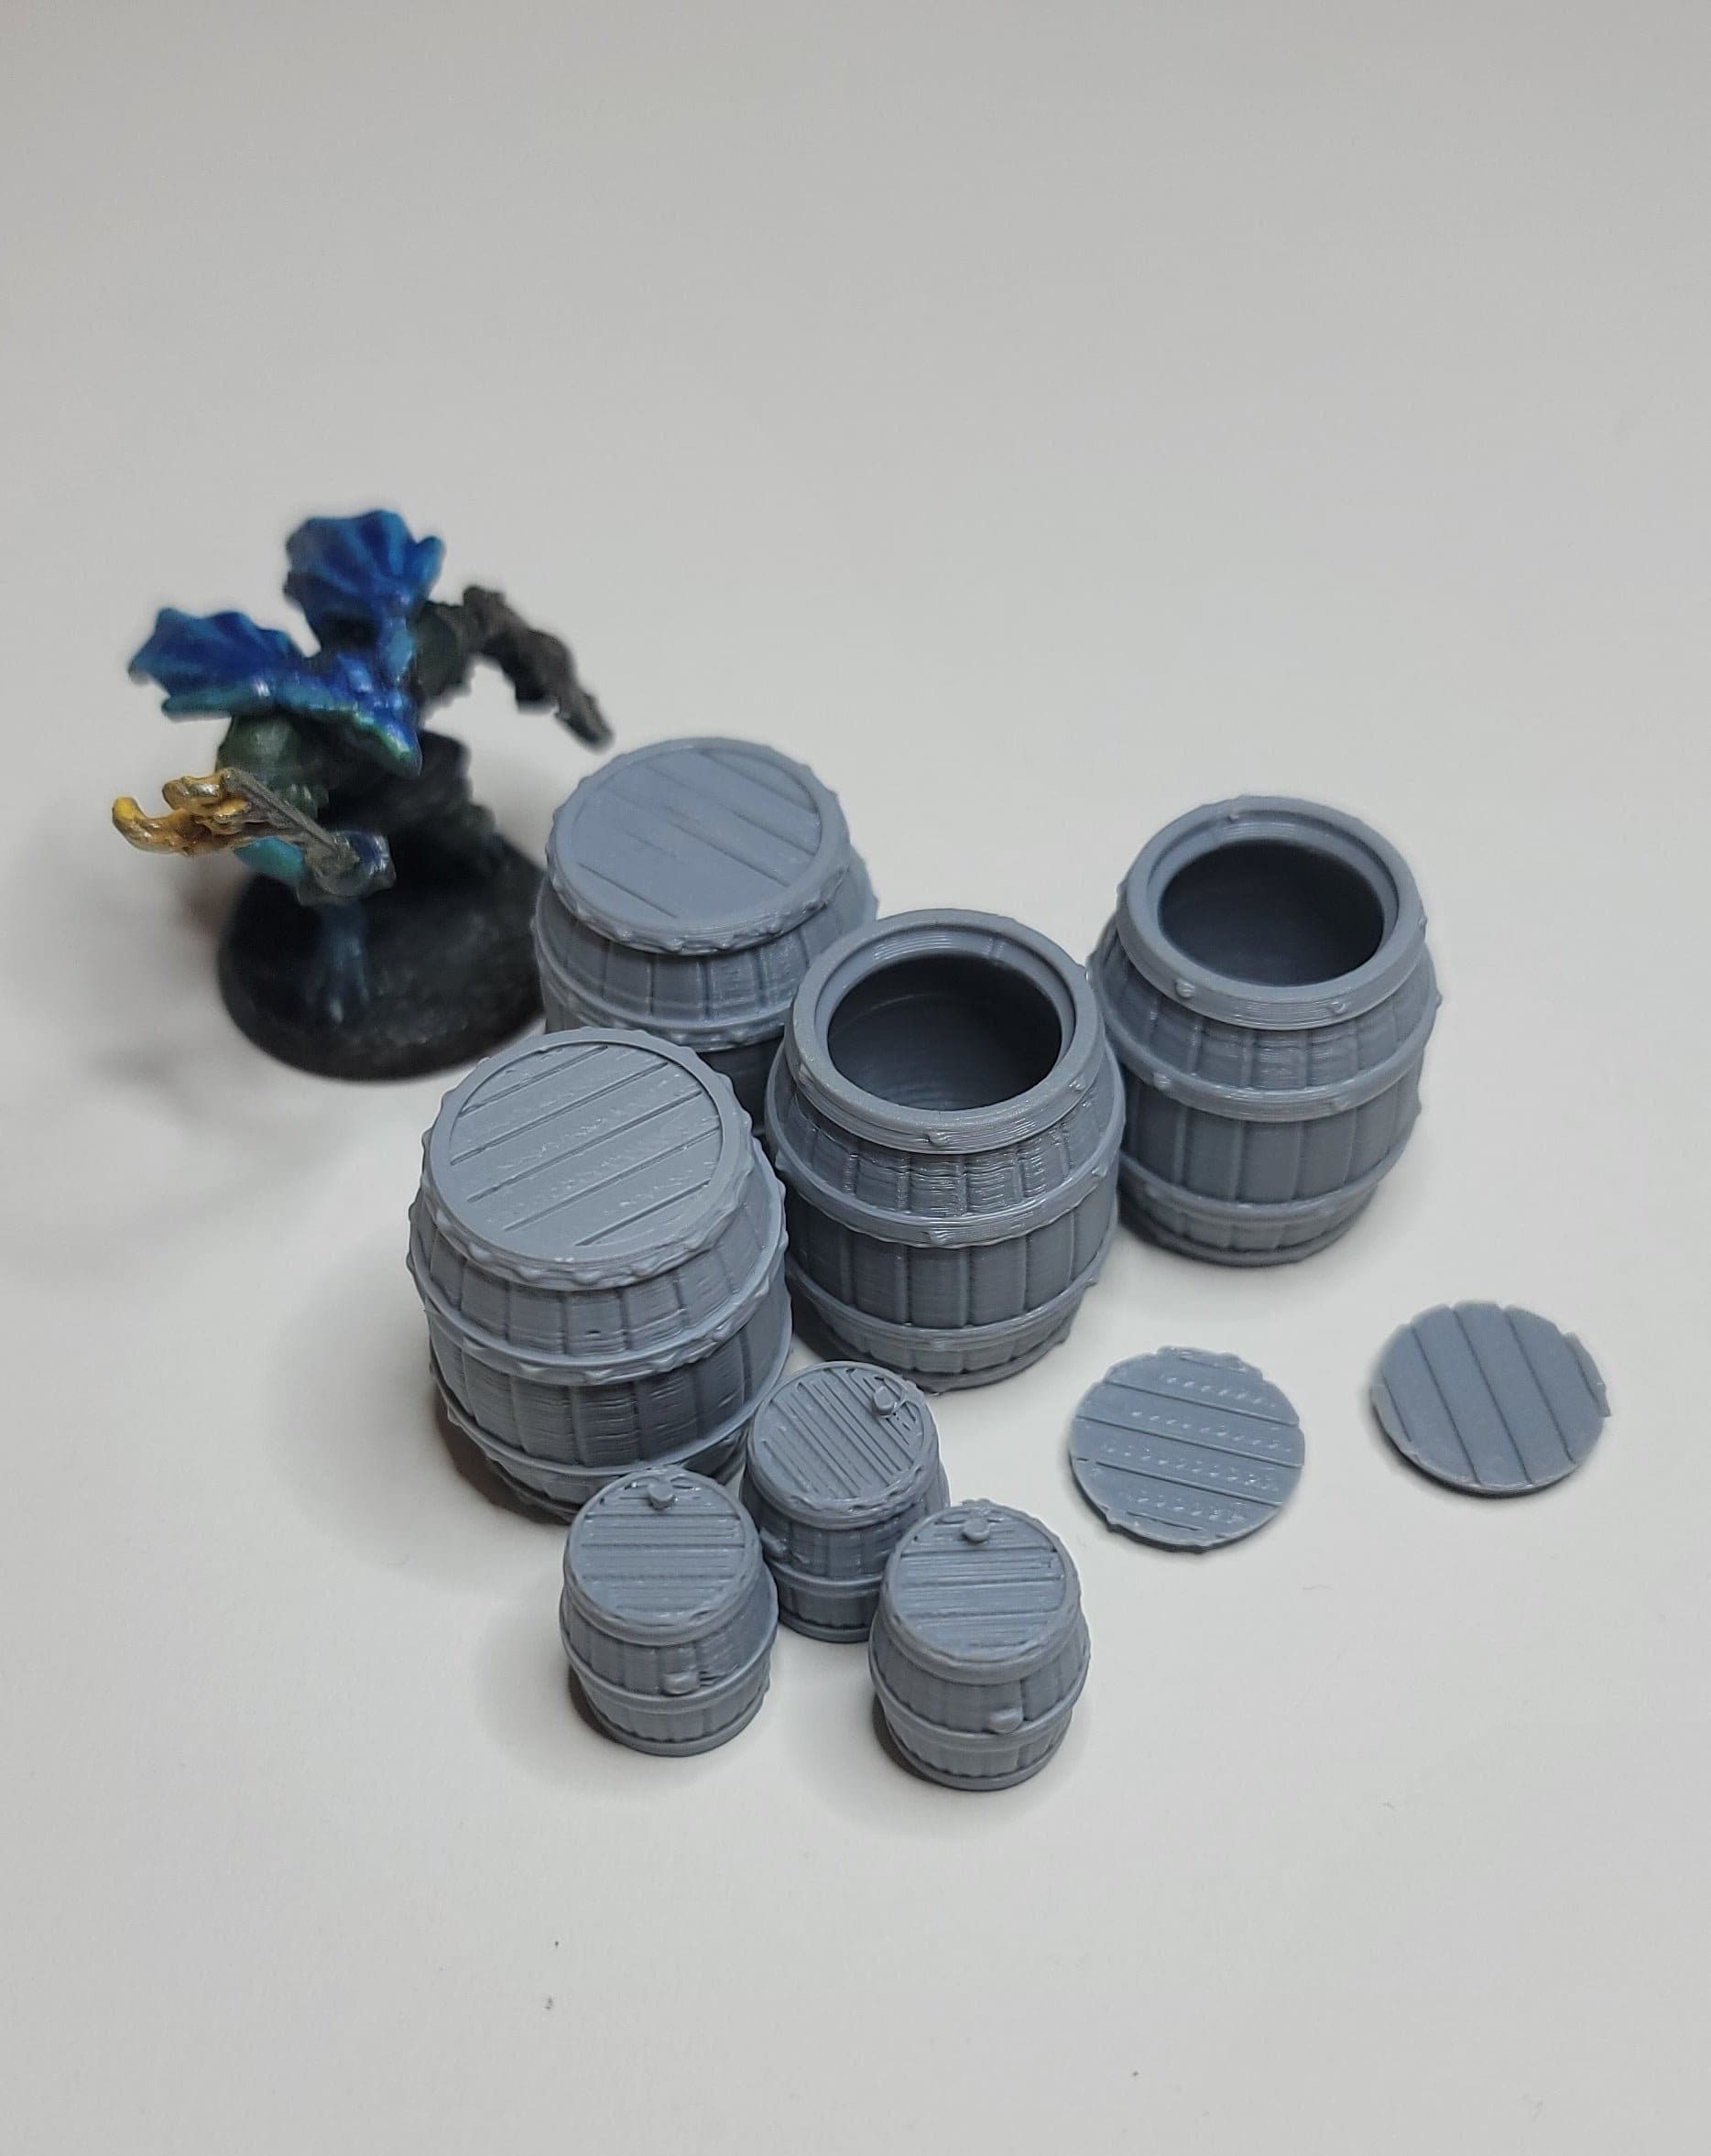 Wooden Stake Barrels - Medium/Small - Open/Closed | RPG Accessories | 3D printed | 28mm | 32mm | Terrain Scatter